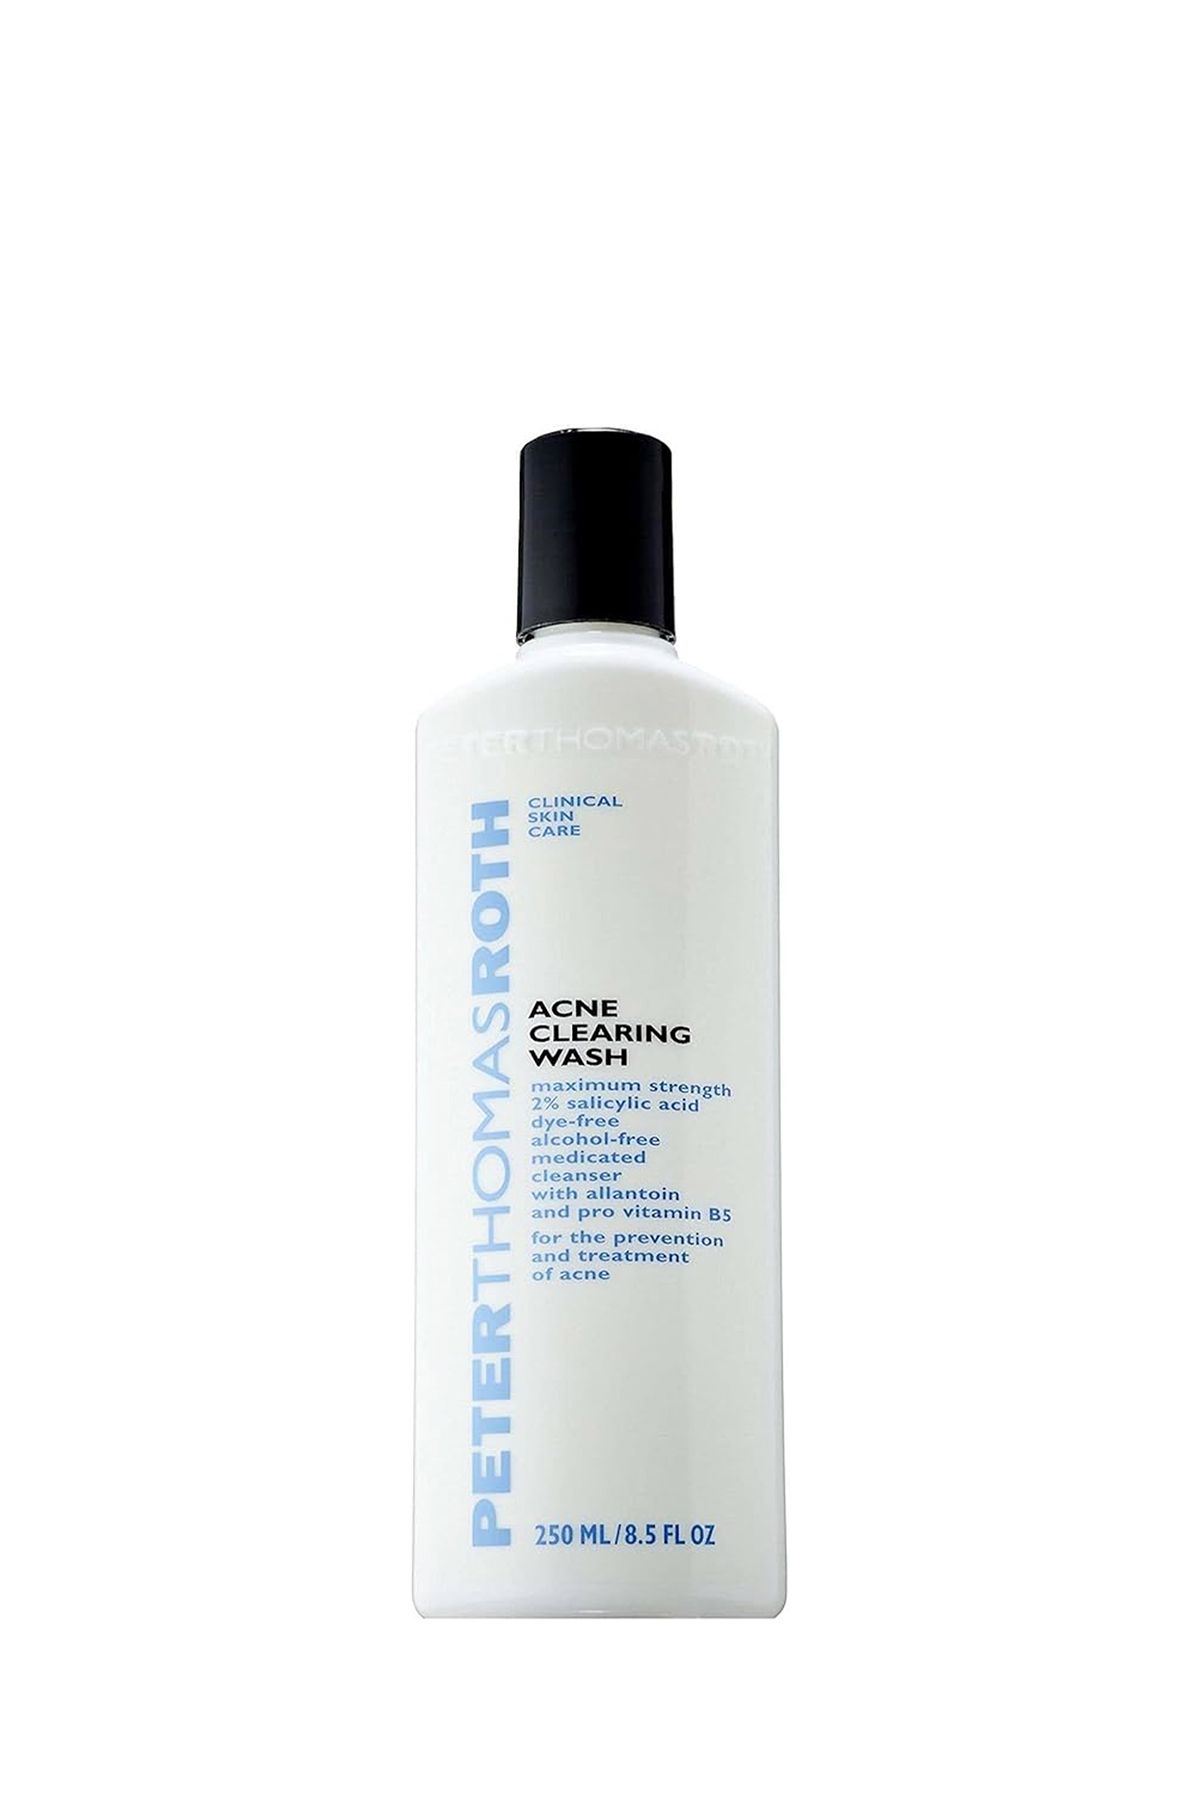 PETER THOMAS ROTH Acne Clearing Wash 250 ml